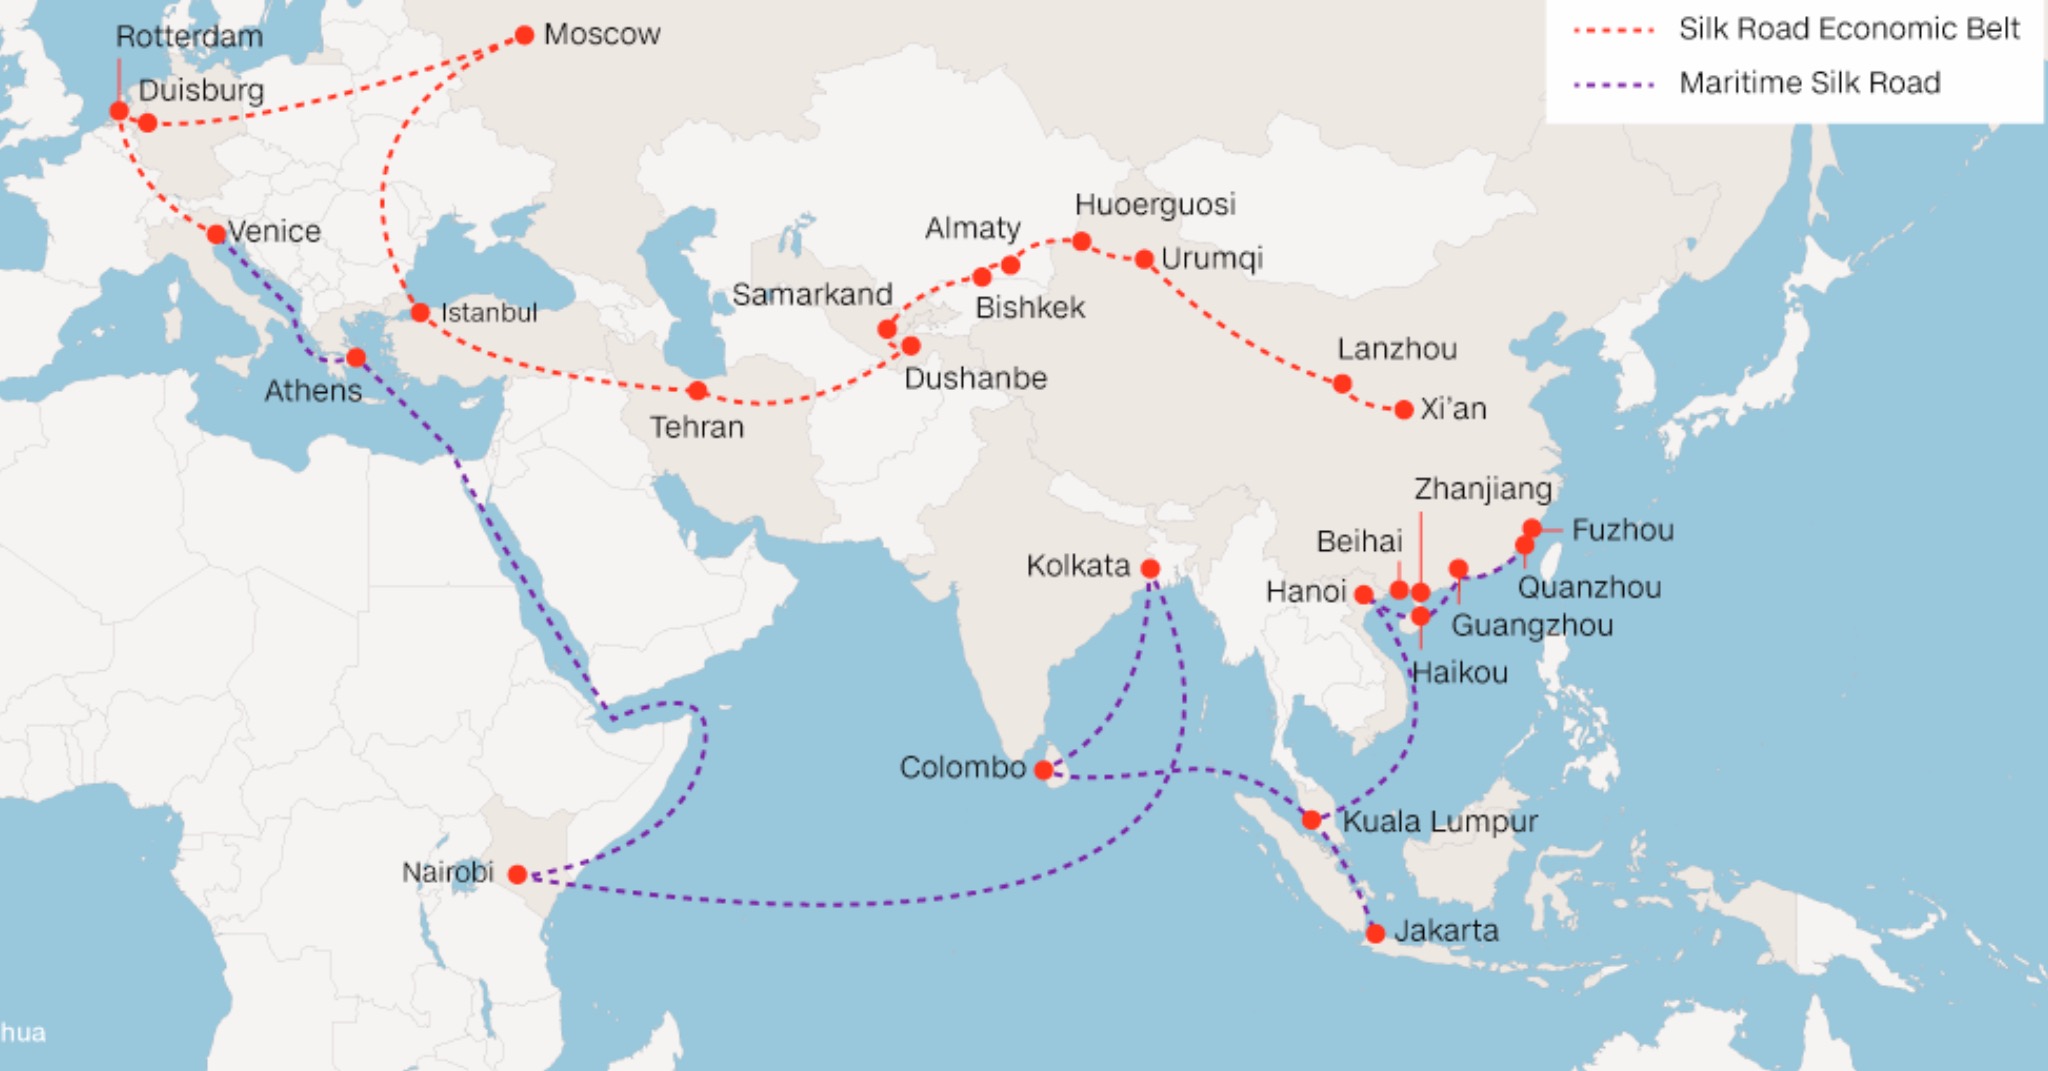 ONE BELT, ONE ROAD - GREAT INITIATIVE OR A ROAD TO NOWHERE